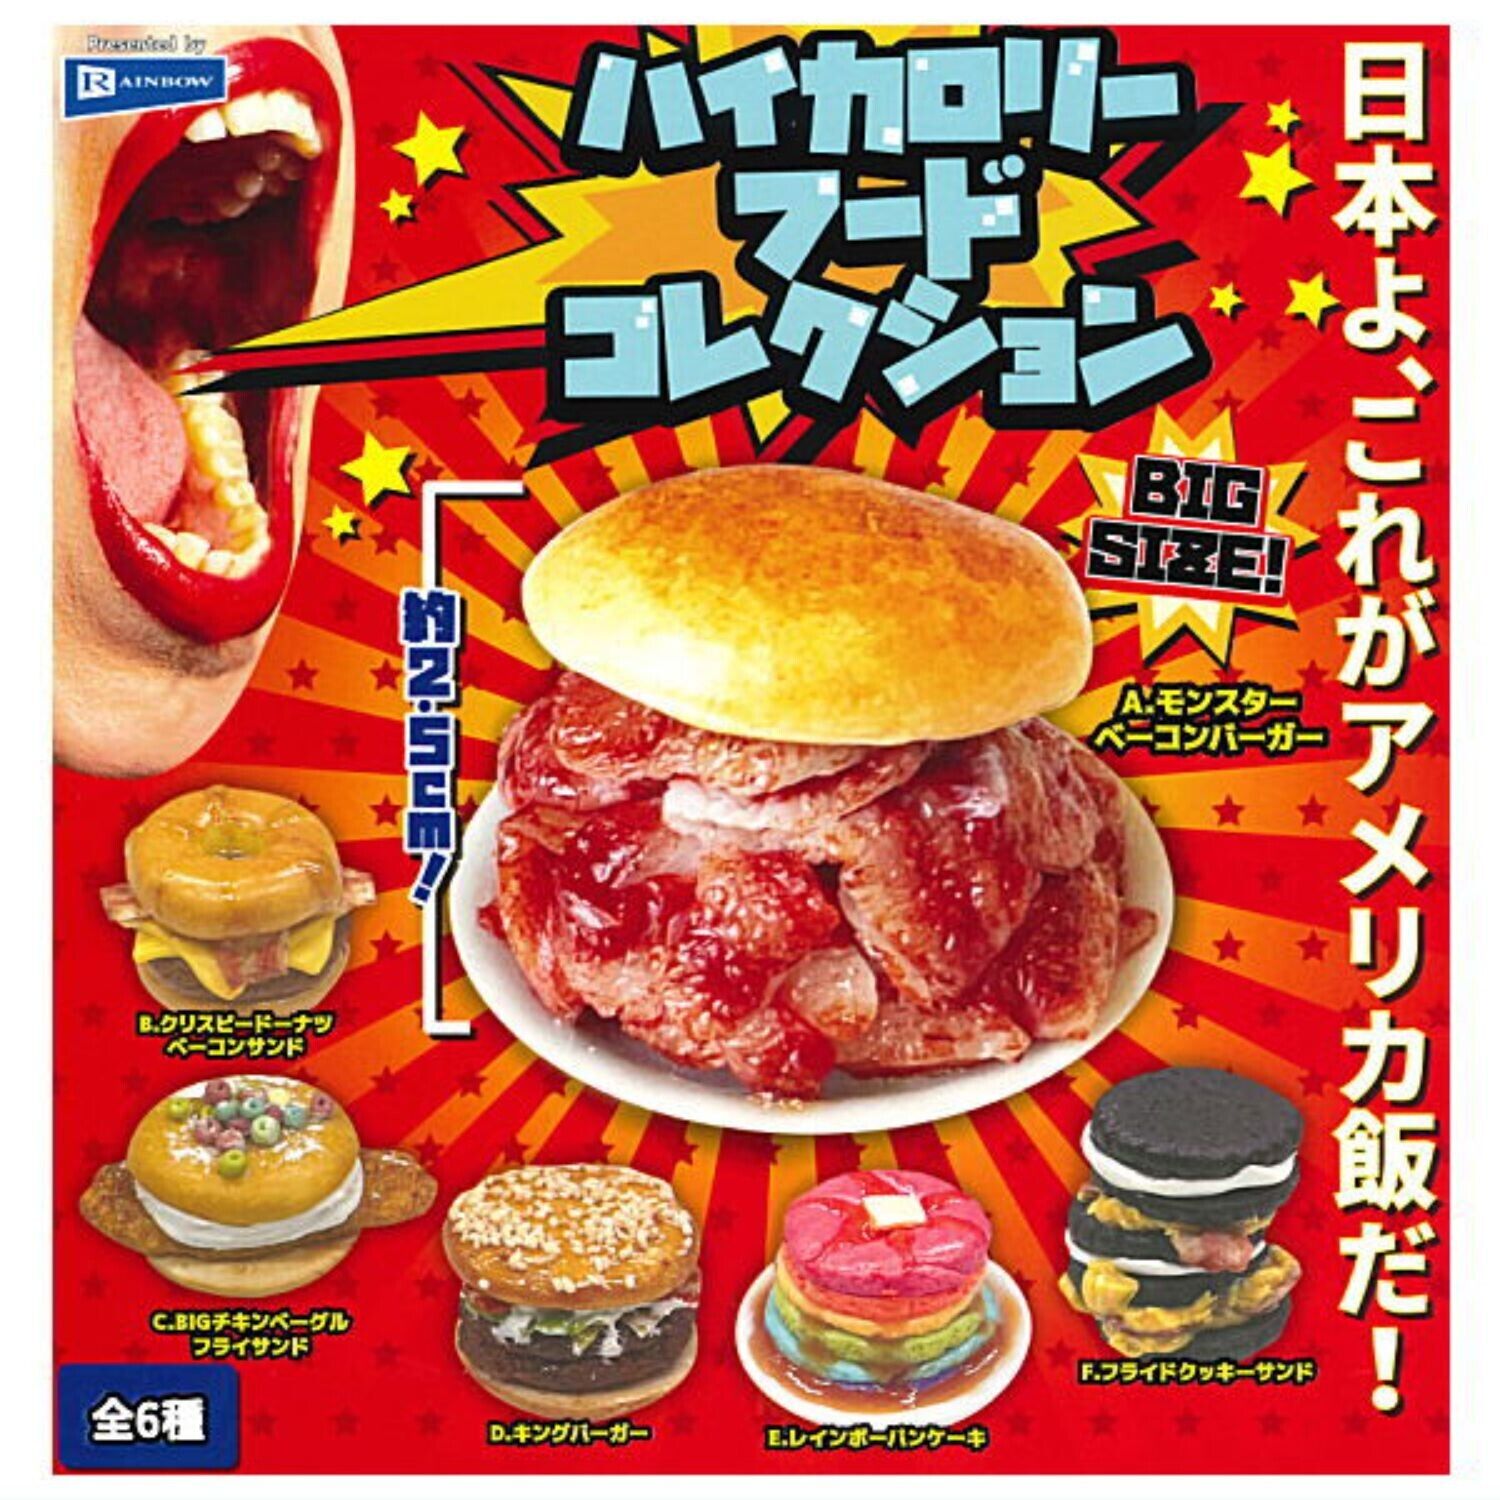 High calorie food collection Mascot Capsule Toy 6 Types Full Comp Set Gacha New